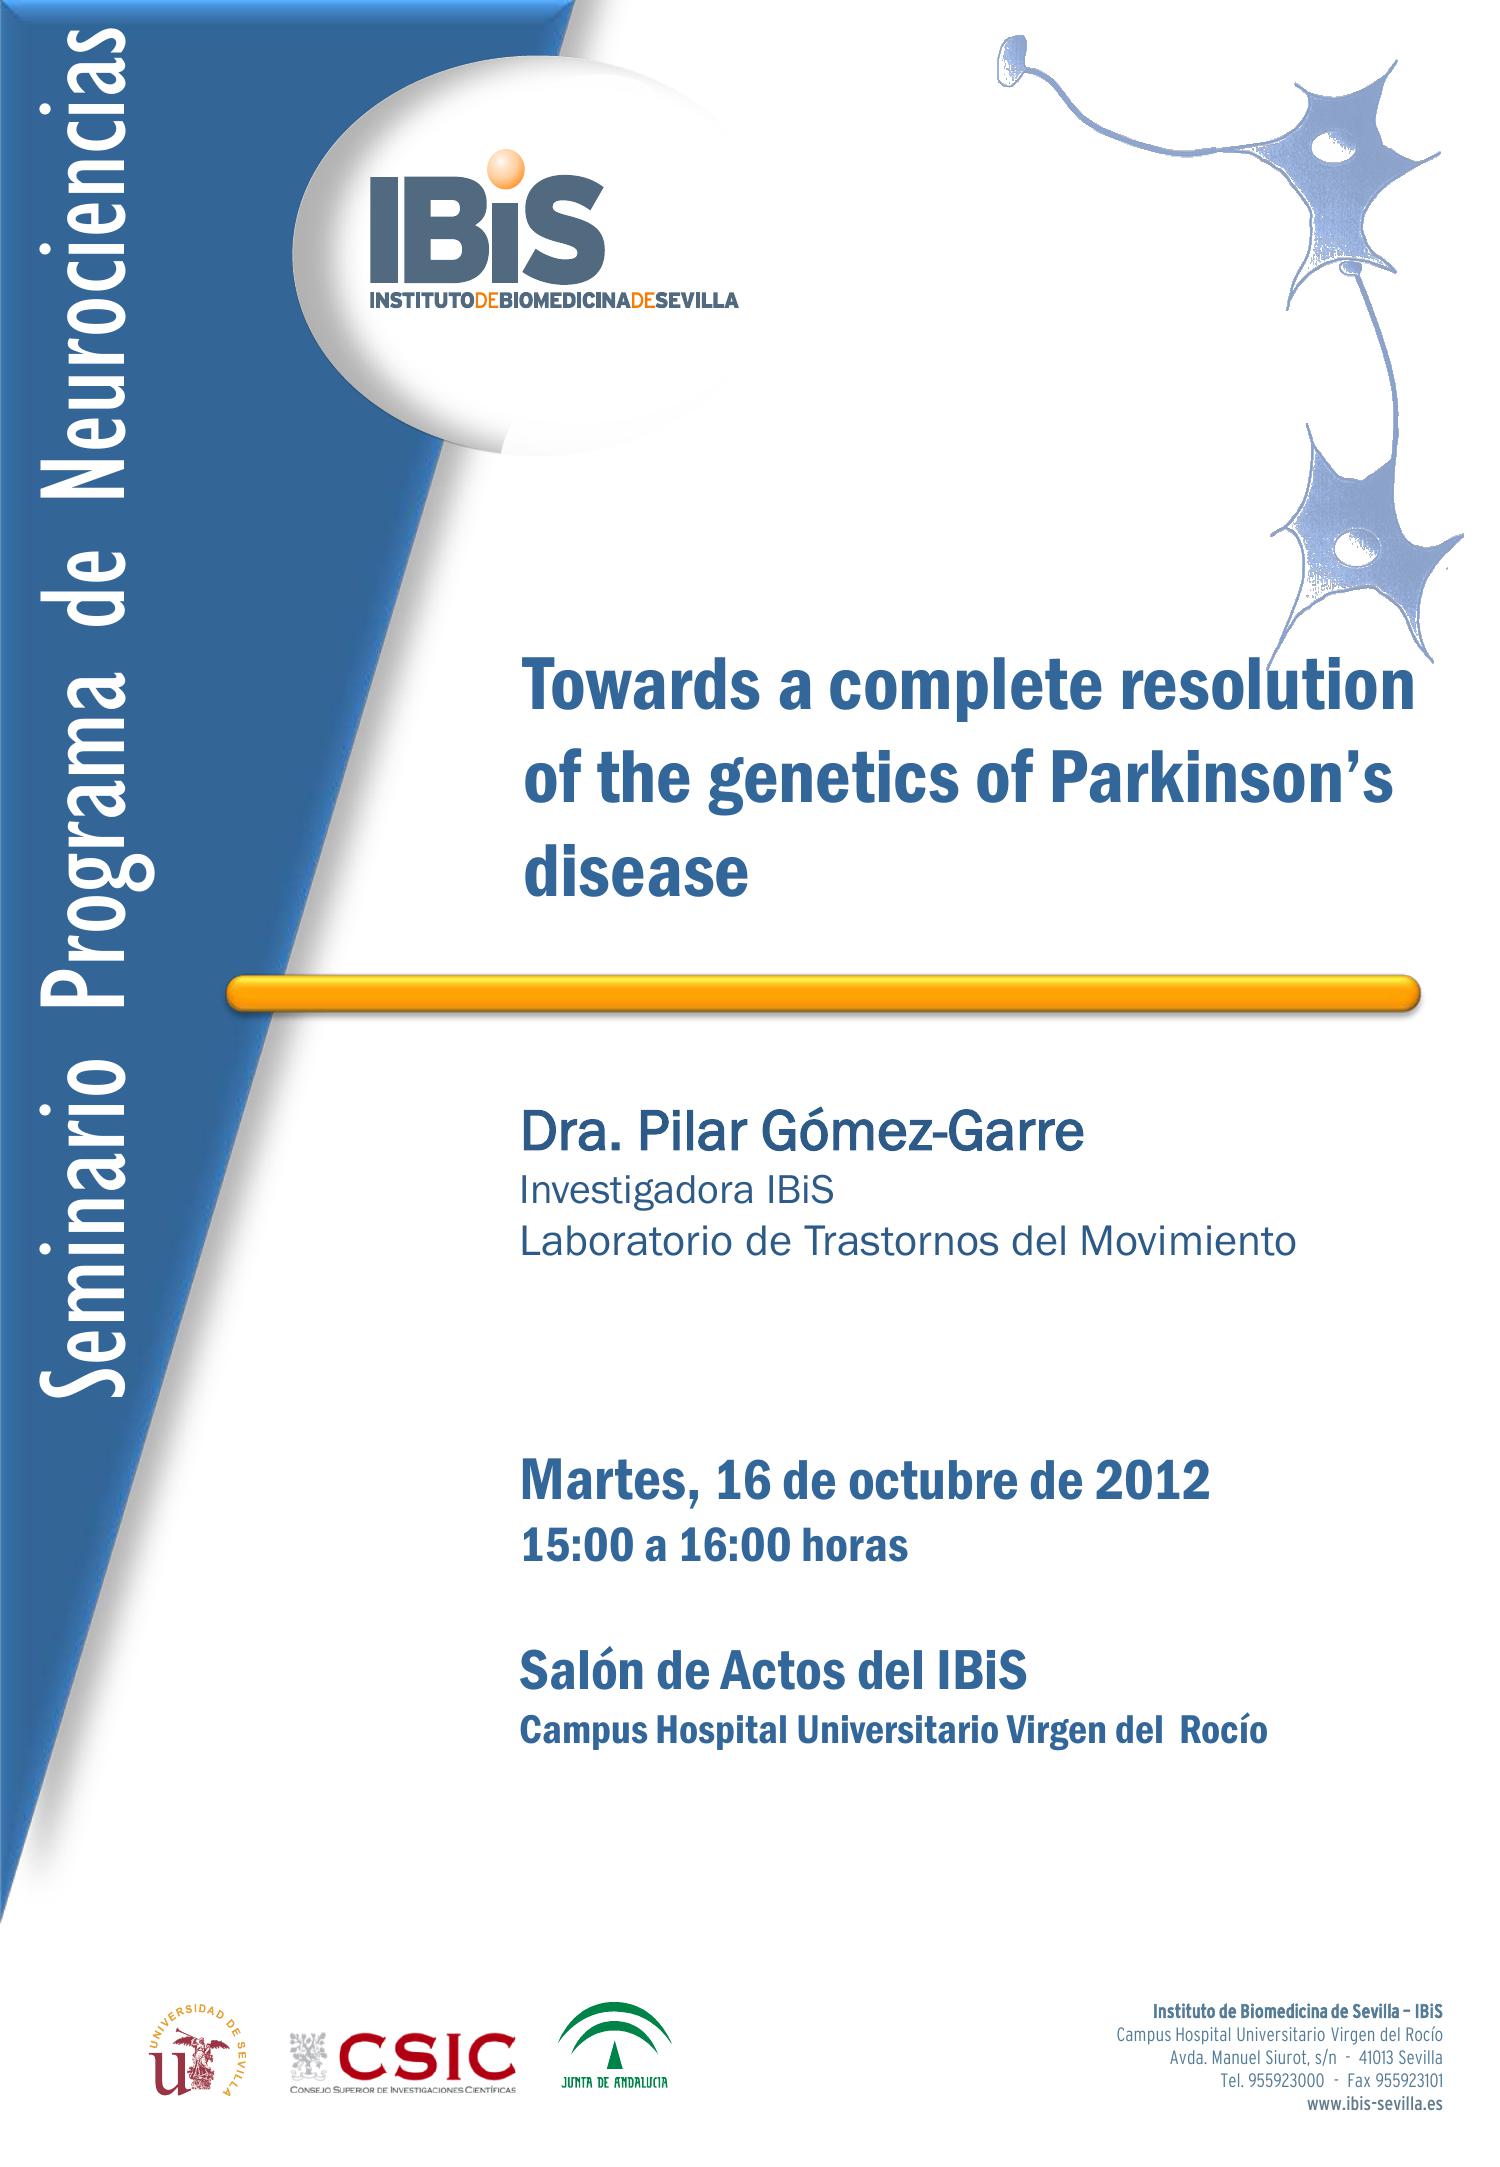 Poster: Towards a complete resolution of the genetics of Parkinson’s disease.